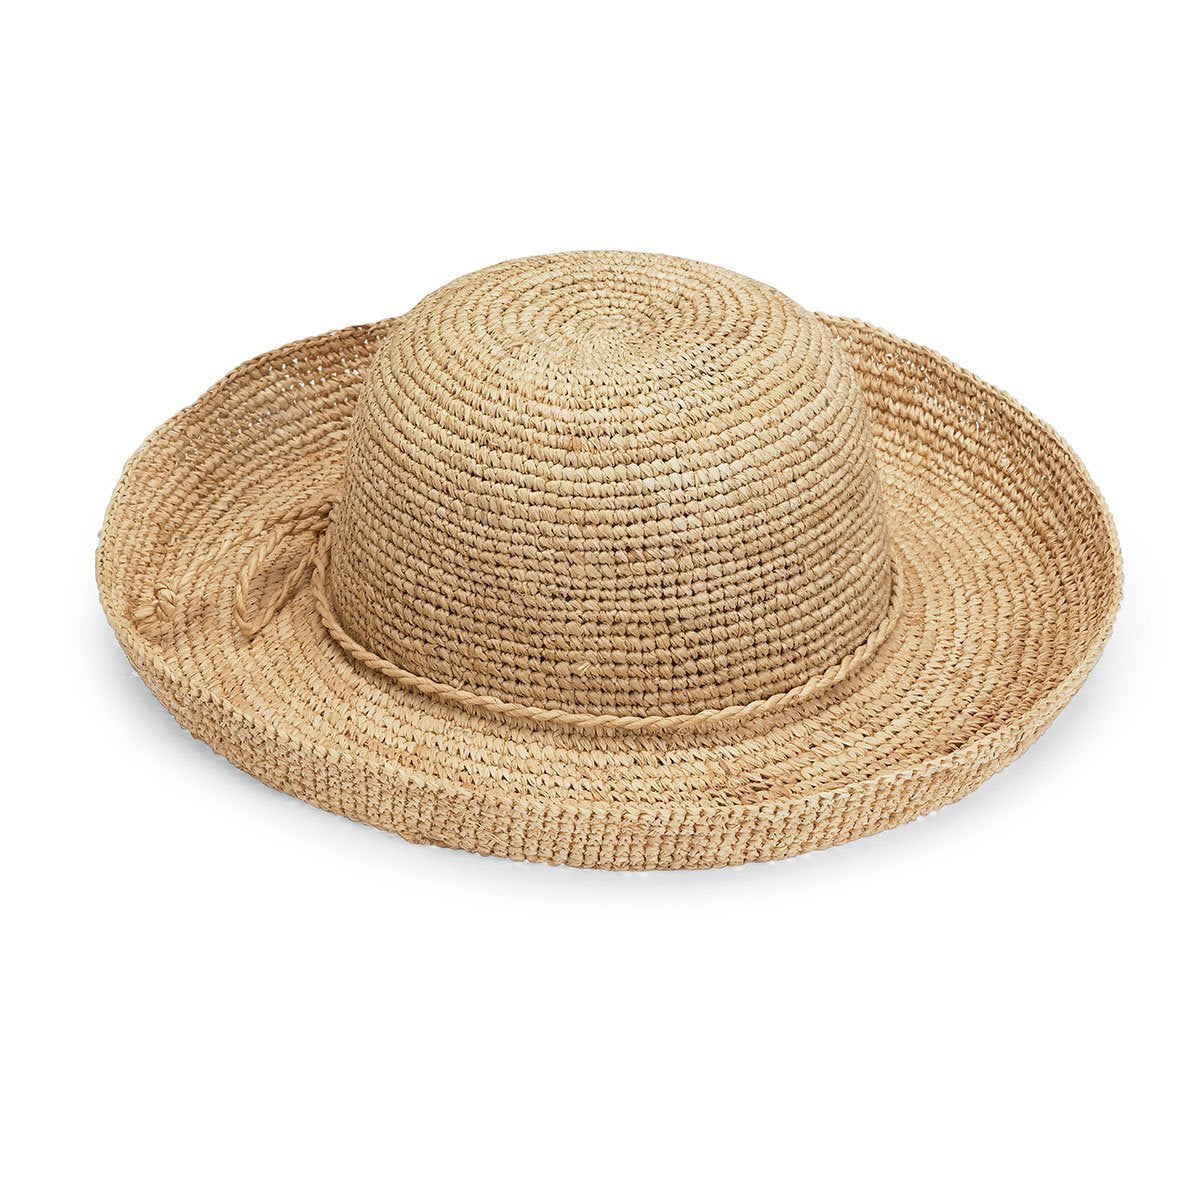 Featuring Angled View of the Catalina Big Wide Brim Crown Style Straw Sun Hat from Wallaroo